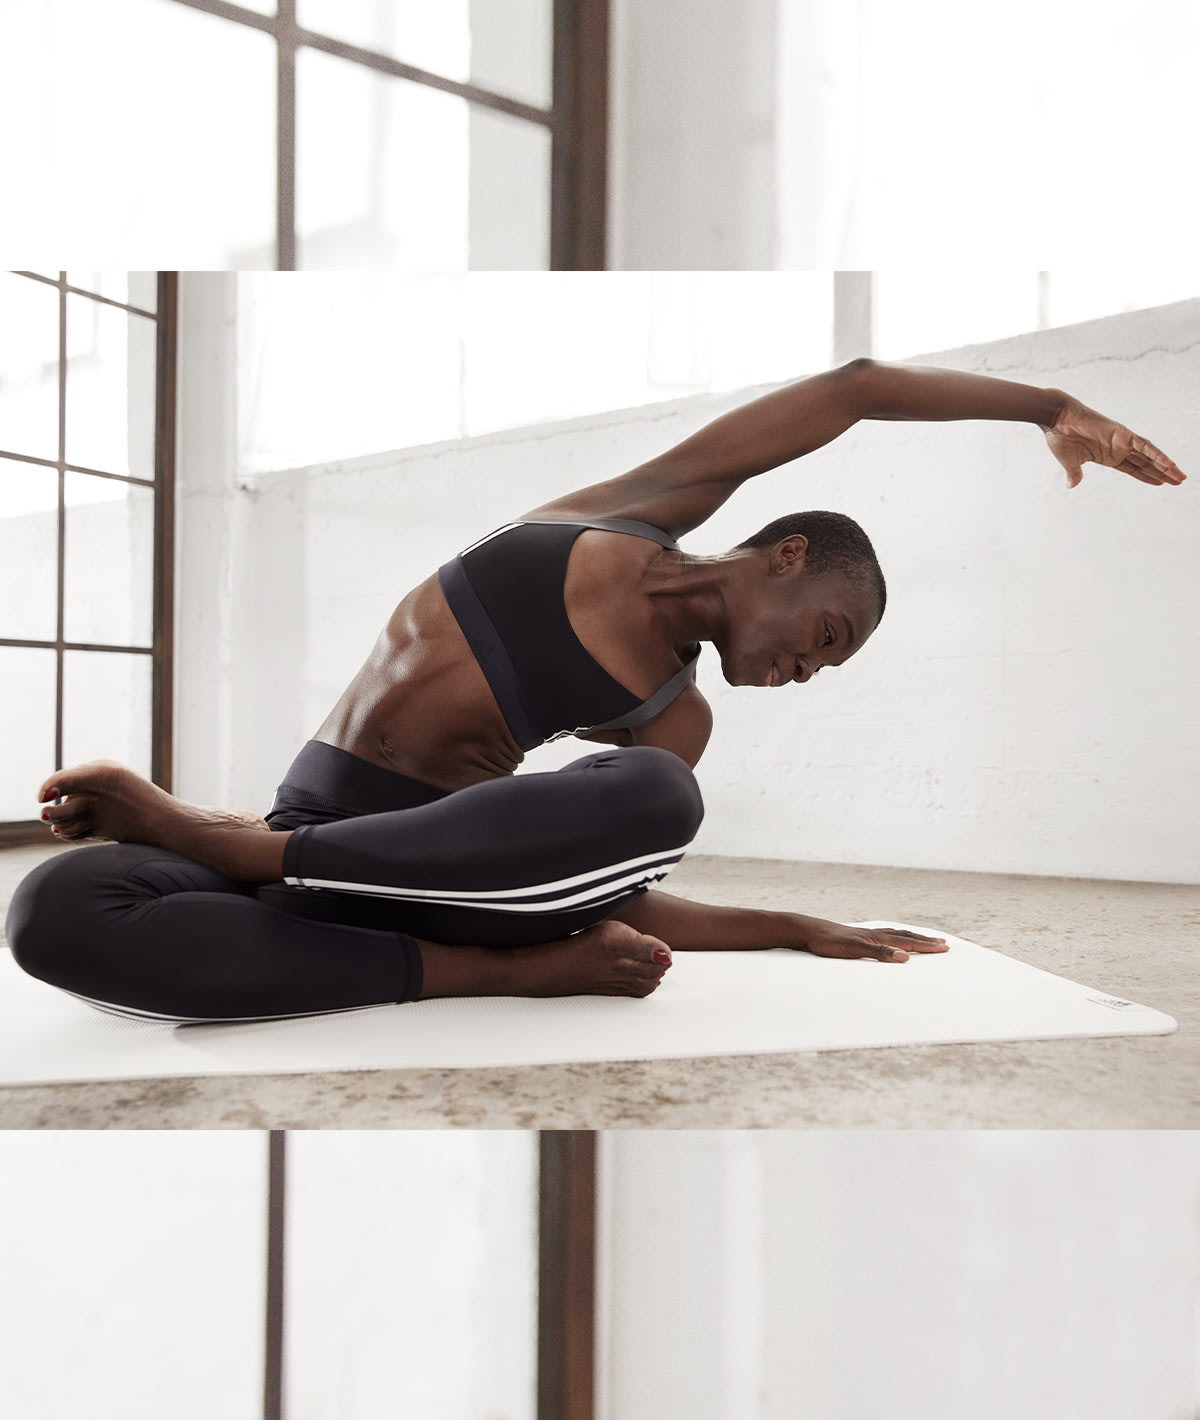 YOGA AT HOME: FIND YOUR FLOW